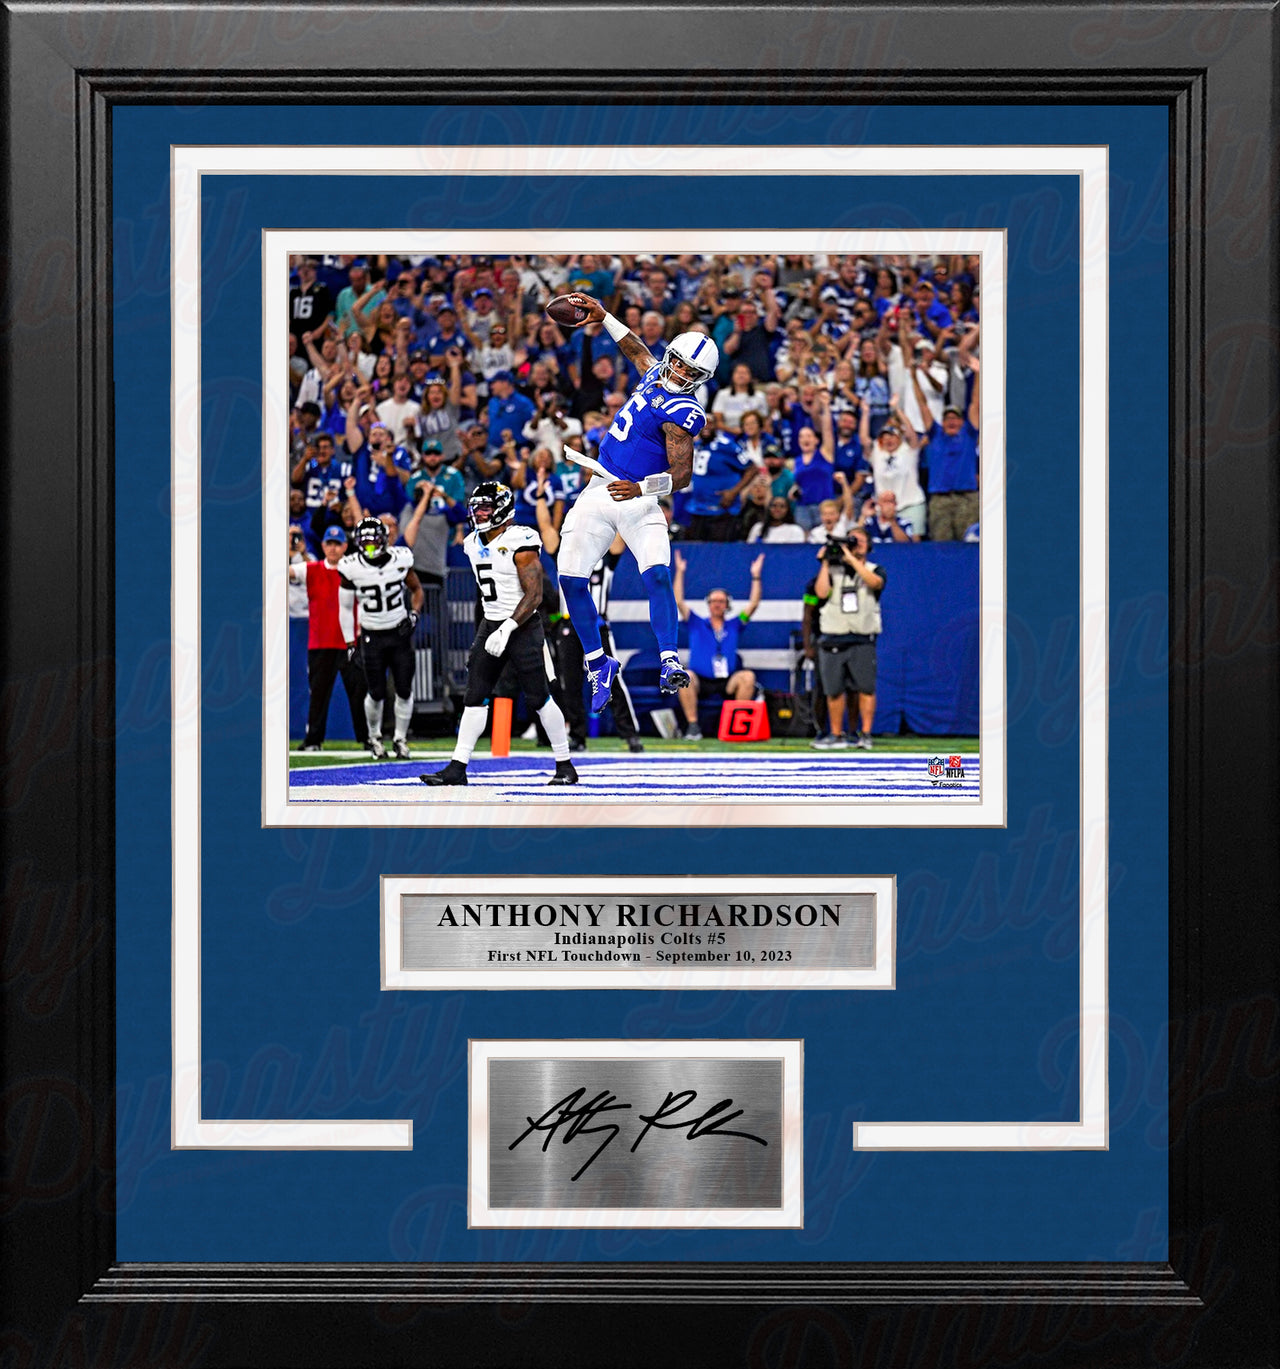 Anthony Richardson First NFL Touchdown Indianapolis Colts 8x10 Framed Photo with Engraved Autograph